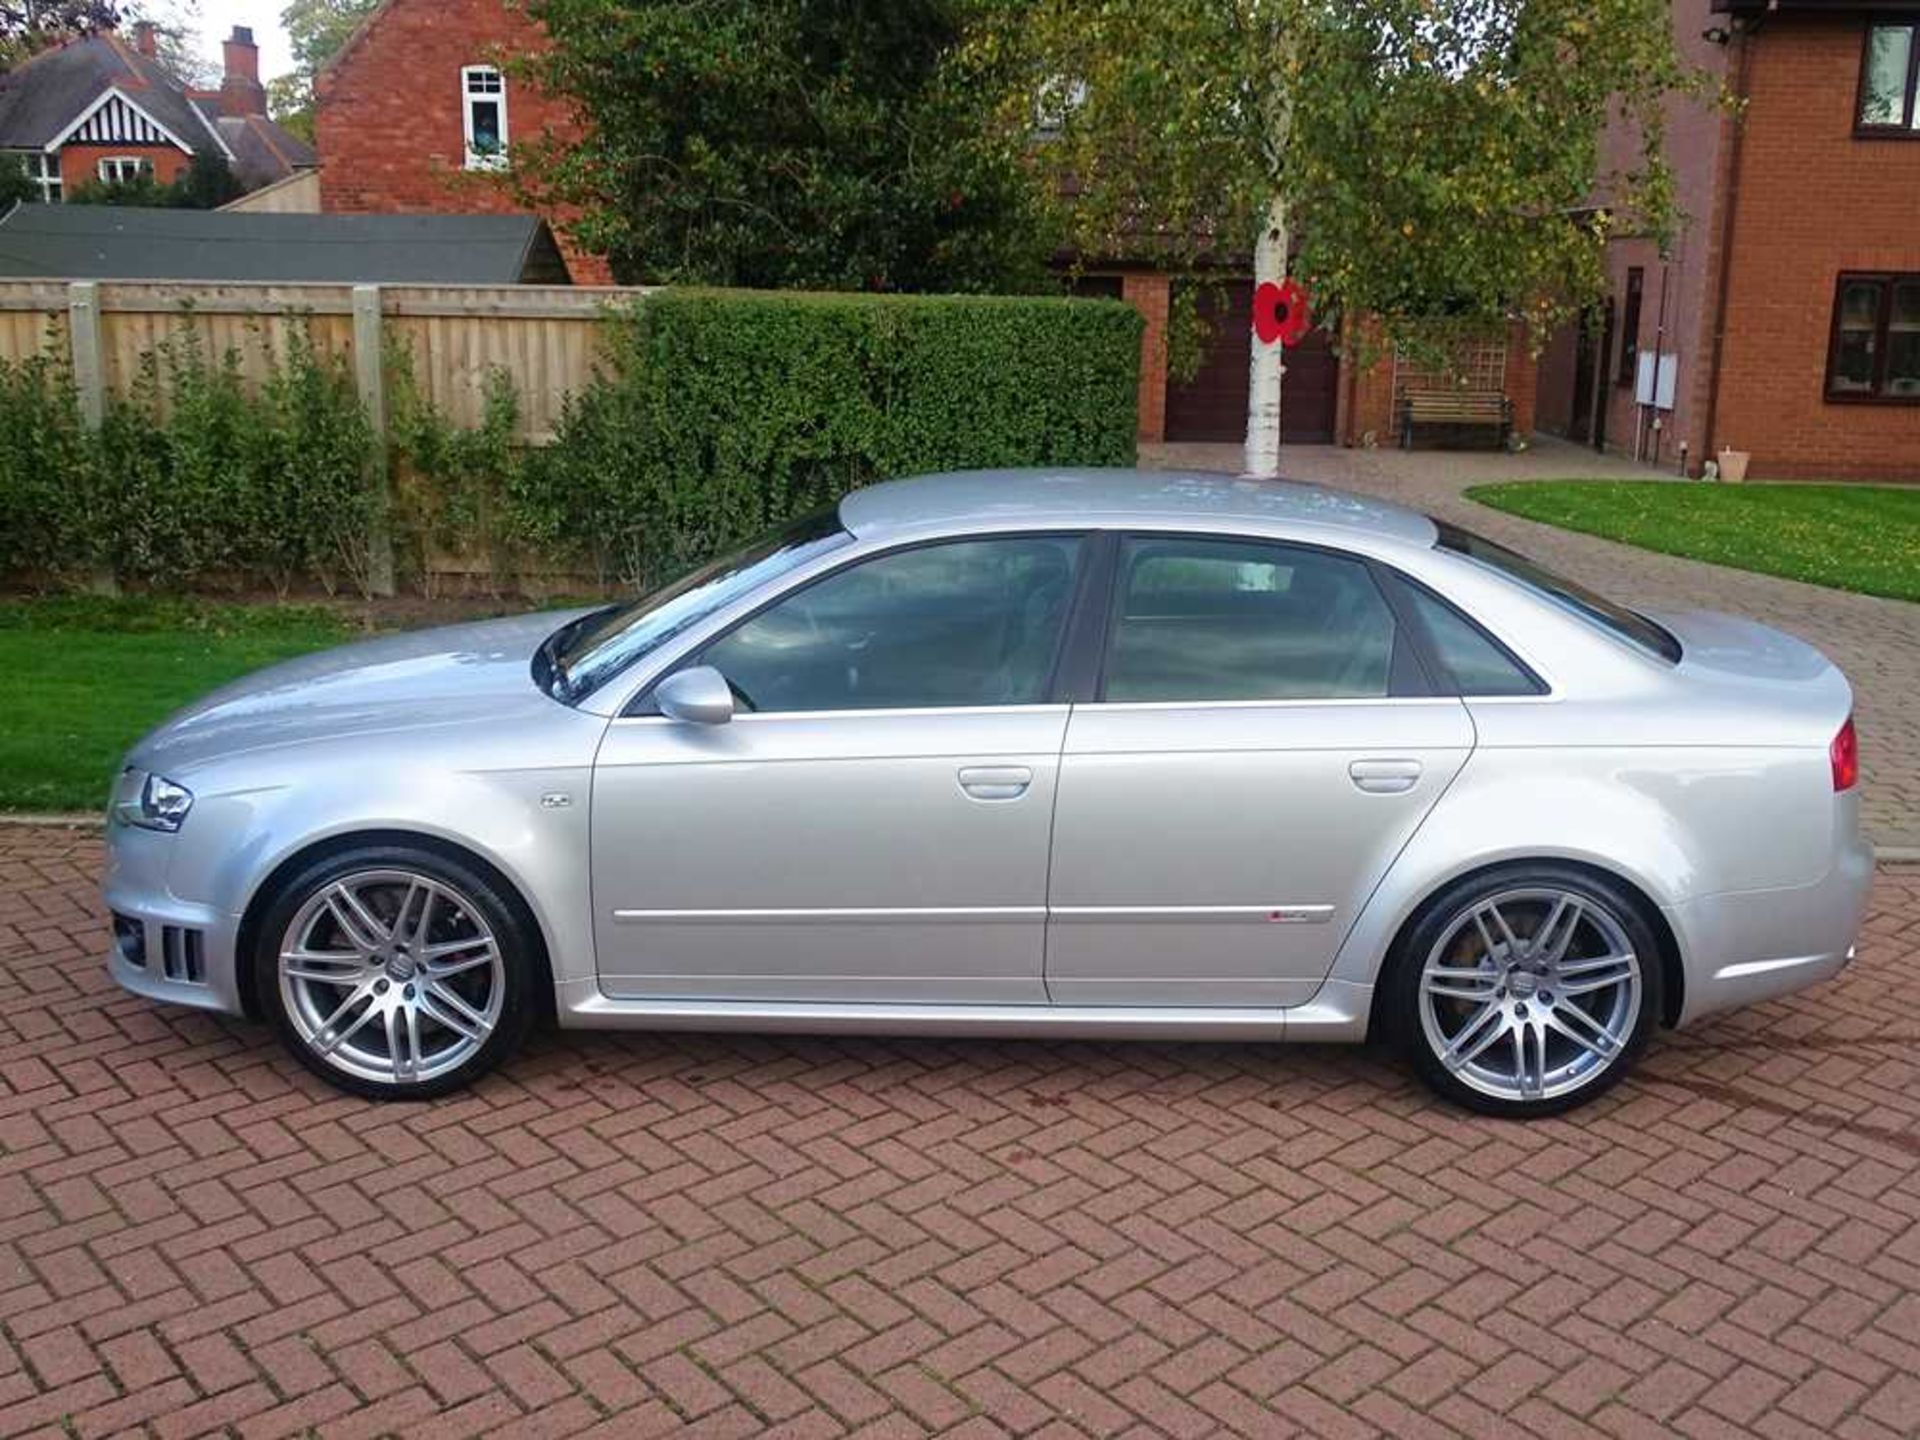 2007 Audi RS4 Saloon One owner and just c.60,000 miles from new - Image 74 of 86